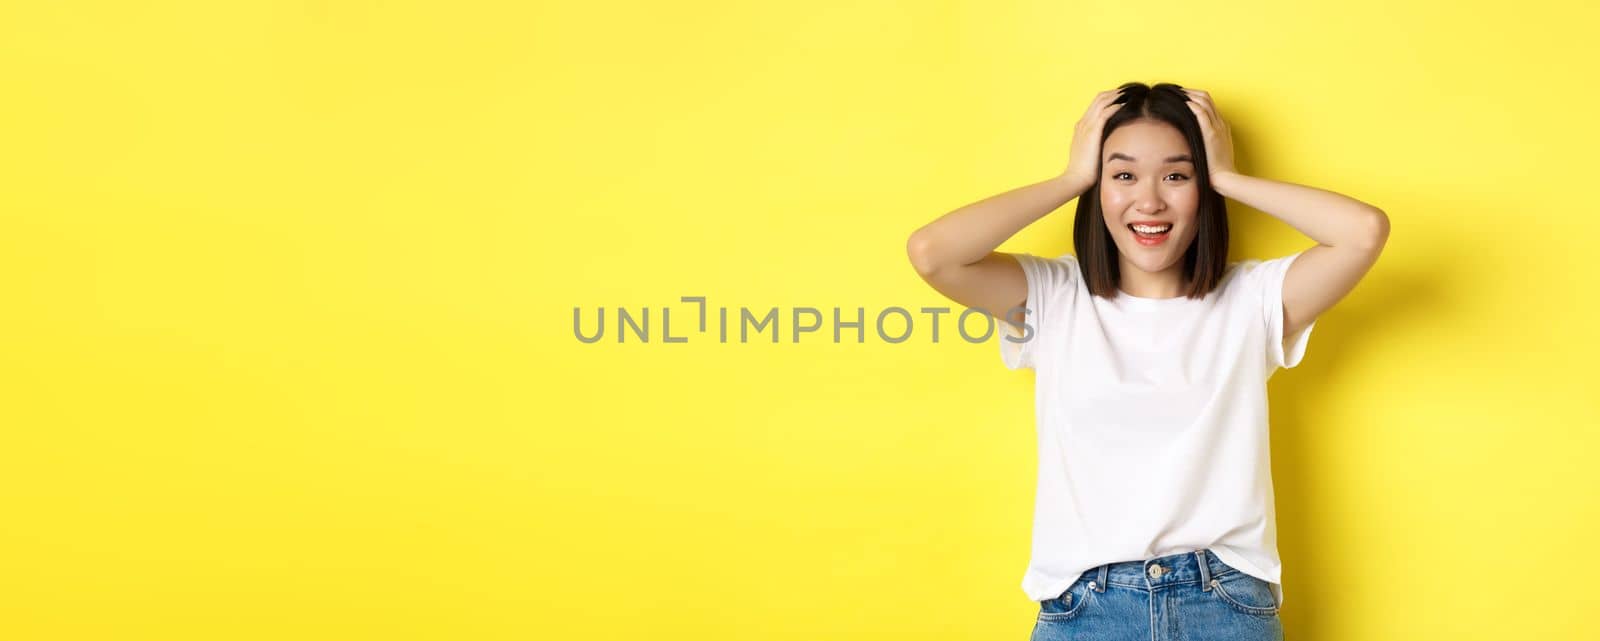 Amazed asian girl winning prize and looking with excitement and disbelief, holding hands on head and smiling happy, standing over yellow background.